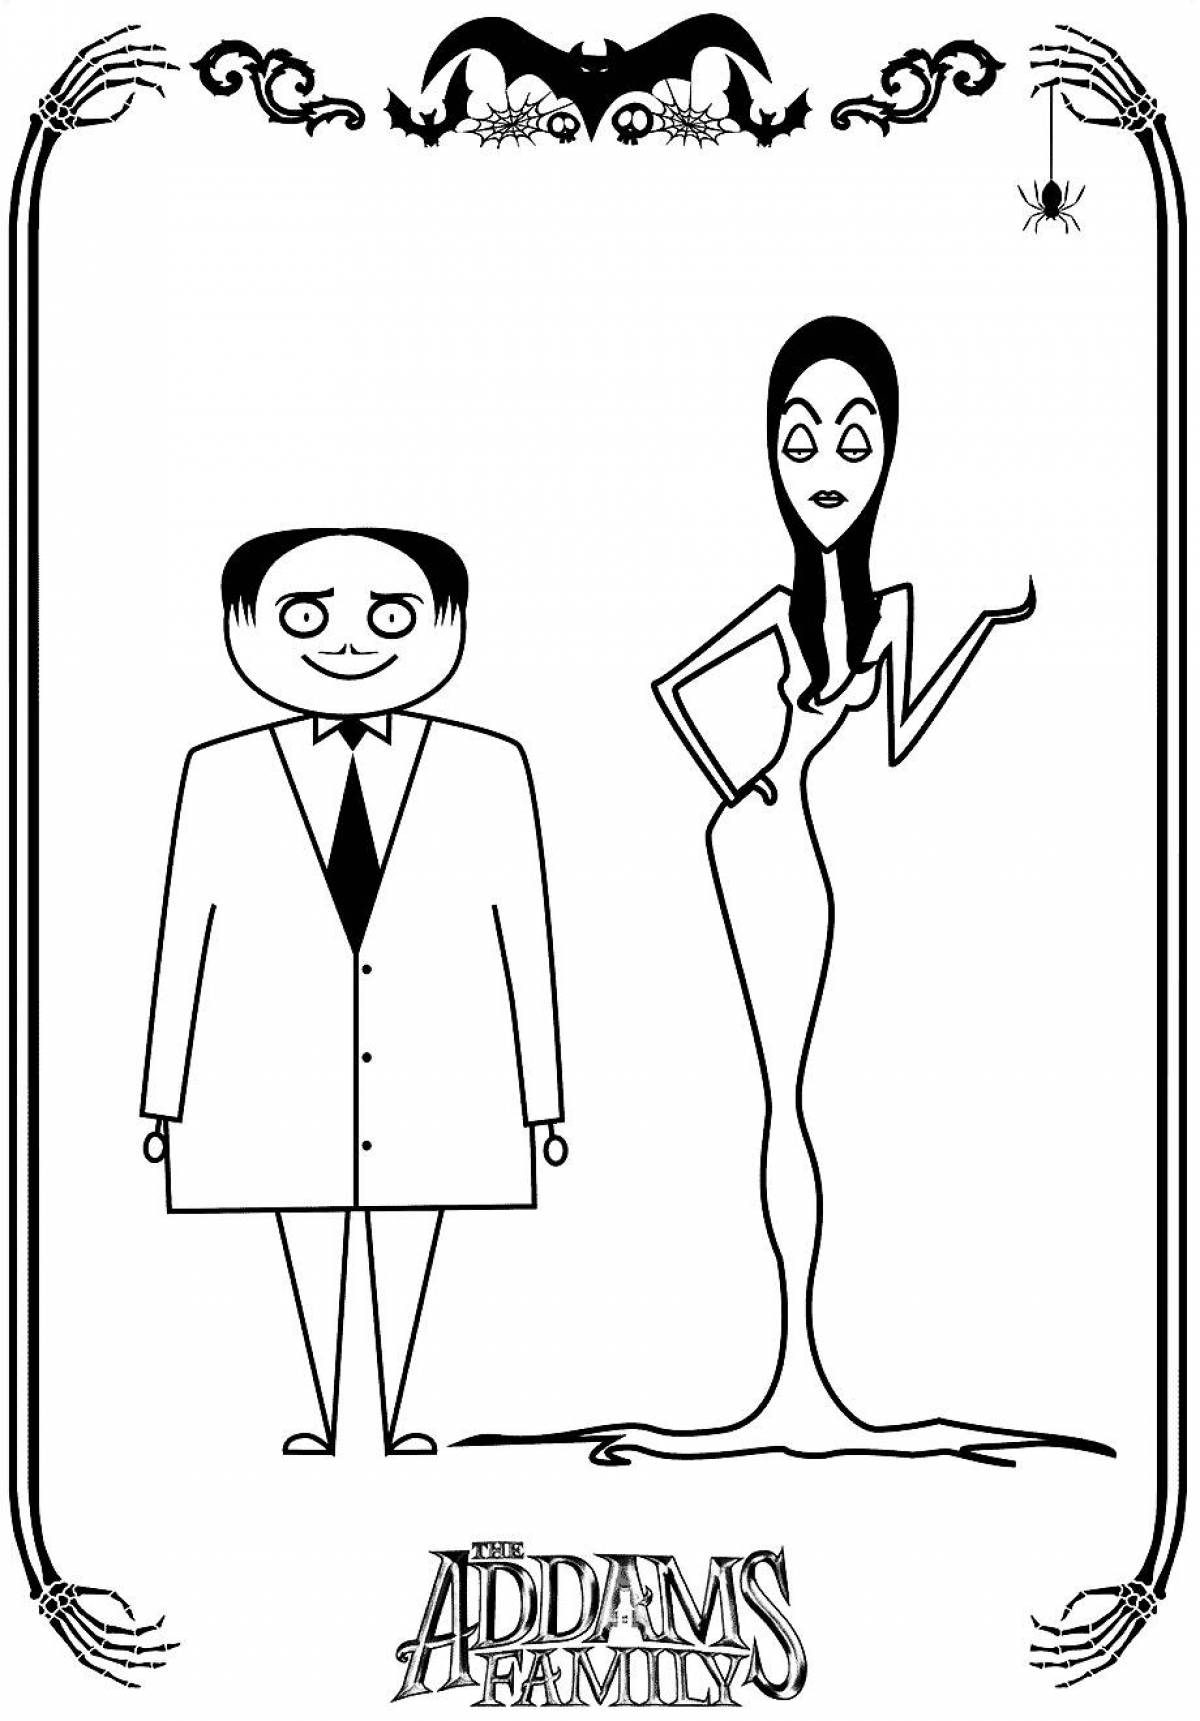 Colorful addams family coloring page